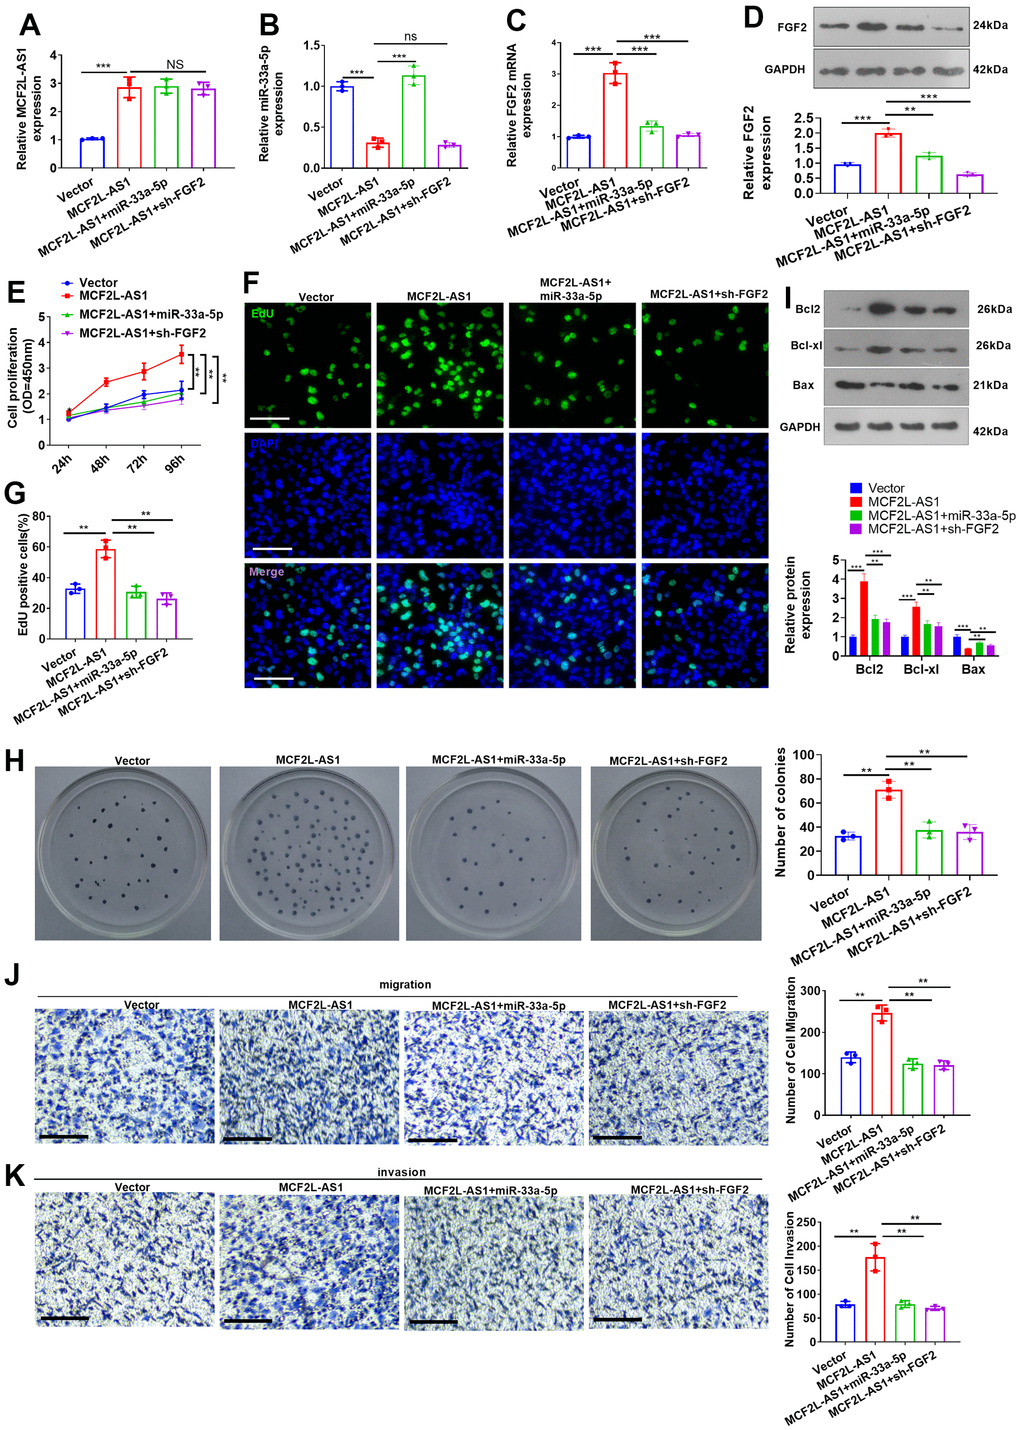 Effects of MCF2L-AS1-miR-33a-5p-FGF2 on MHCC97H cell proliferation, invasion and apoptosis. miR-33a-5p mimics or sh-FGF2 or MCF2L-AS1 overexpression plasmids were transfected into MHCC97H cells. (A, B) qRT-PCR detected MCF2L-AS1and miR-33a-5p expression levels. (C) qRT-PCR checked the mRNA level of FGF2. (D) Western blot was used for detecting FGF2 expression. (E) CCK8 assay detected MHCC97H and HCCLM3 cell proliferation. (F, G) EdU staining was performed for evaluating cell proliferation. Scale bar=50 μm. (H) Colony formation assay was conducted for detecting cell colony formation ability. (I) Western blot was conducted for evaluating apoptosis-related proteins, including Bcl2, Bcl-xl, and Bax. (J, K) Transwell assay detected MHCC97H cell migration and invasion, Scale bar=200 μm. NS P>0.05, * P